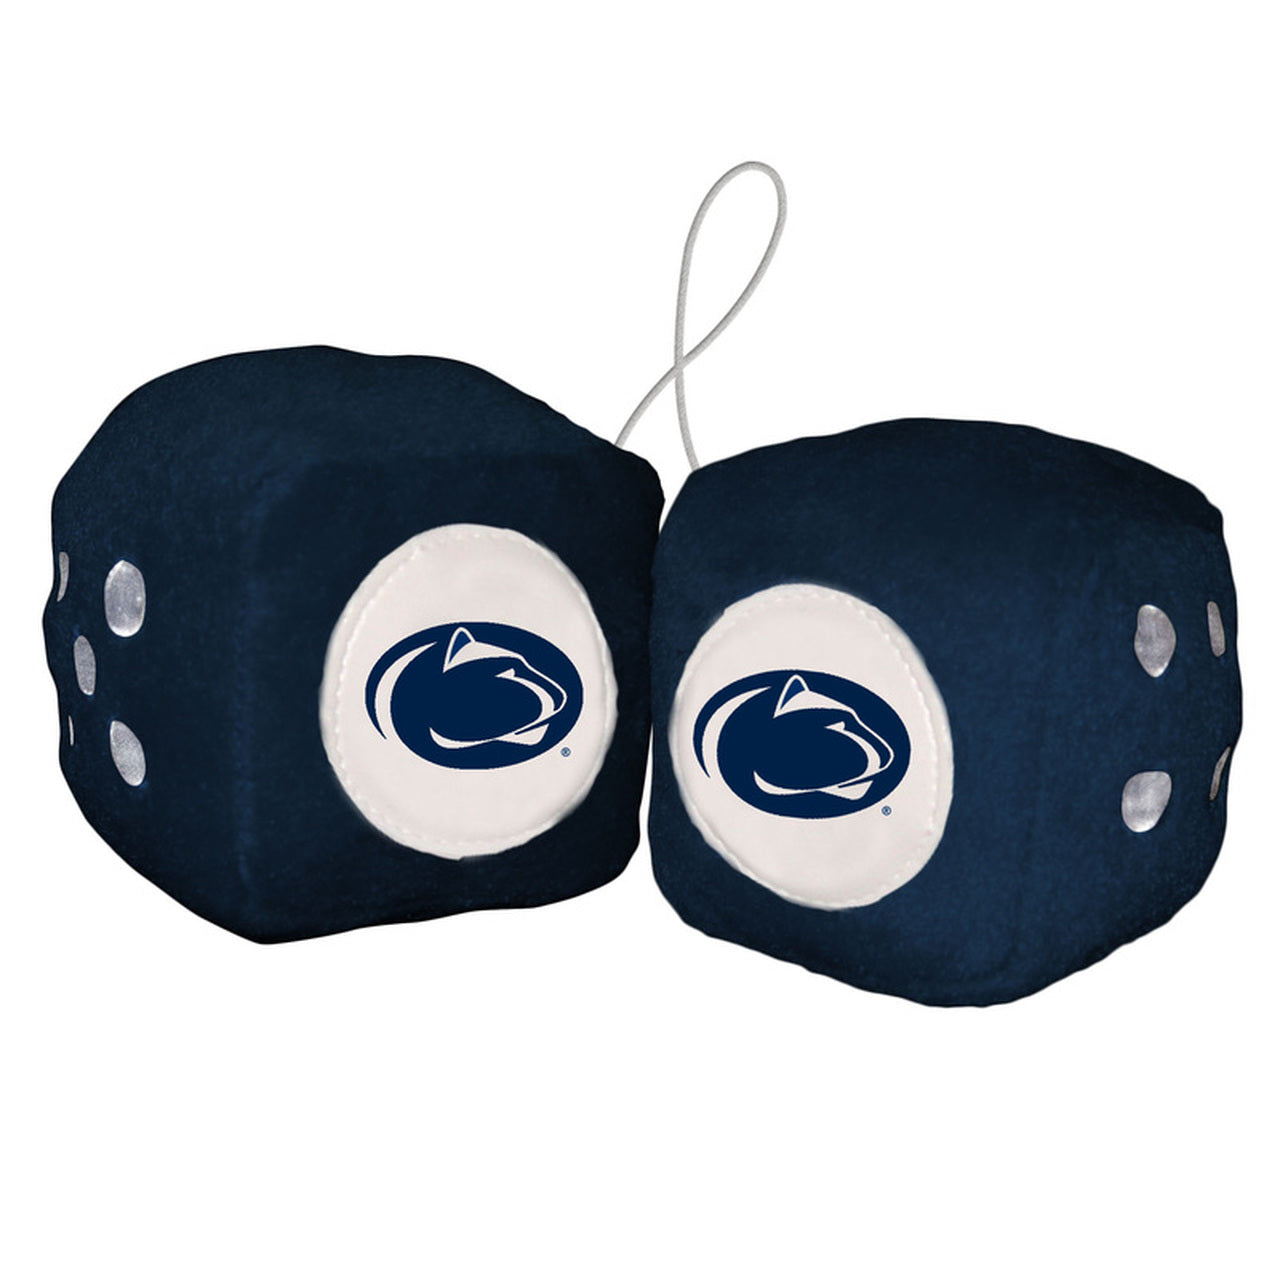 Penn State Nittany Lions Plush Fuzzy Dice by Fremont Die